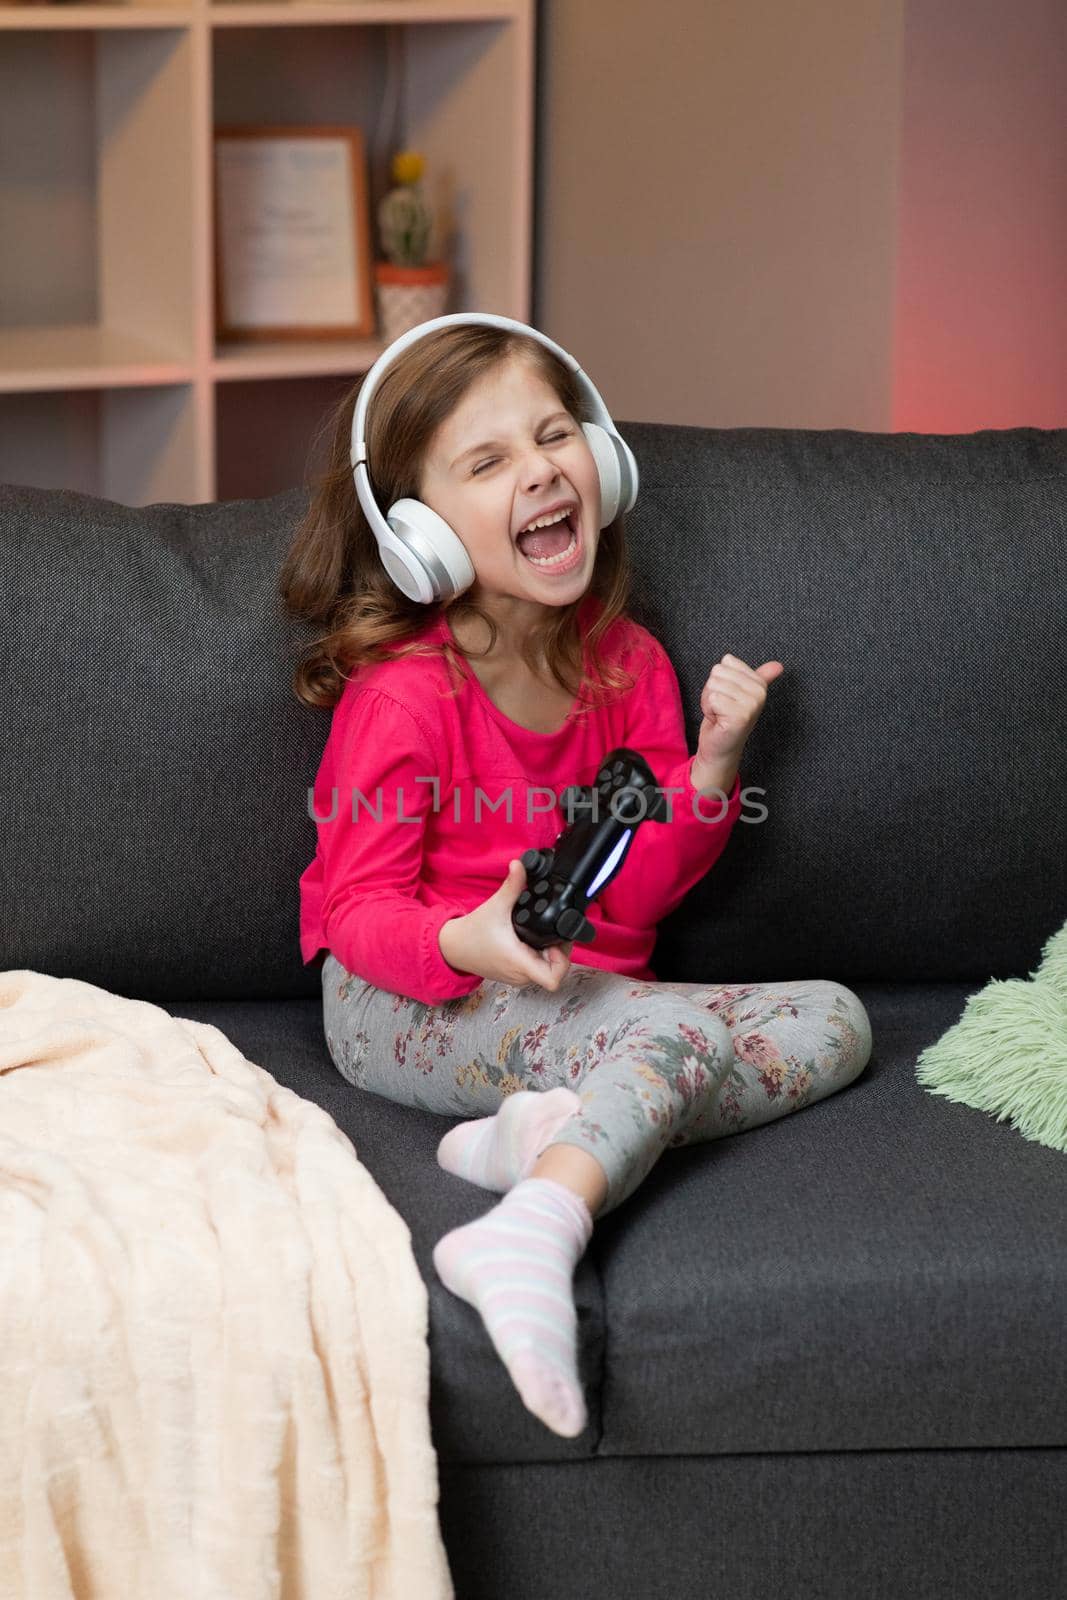 Little girl sitting on sofa playing a video in living room at home. Excited gamer girl hand holding joystick playing console game using a wireless controller. Having fun,enjoy happy expression by uflypro